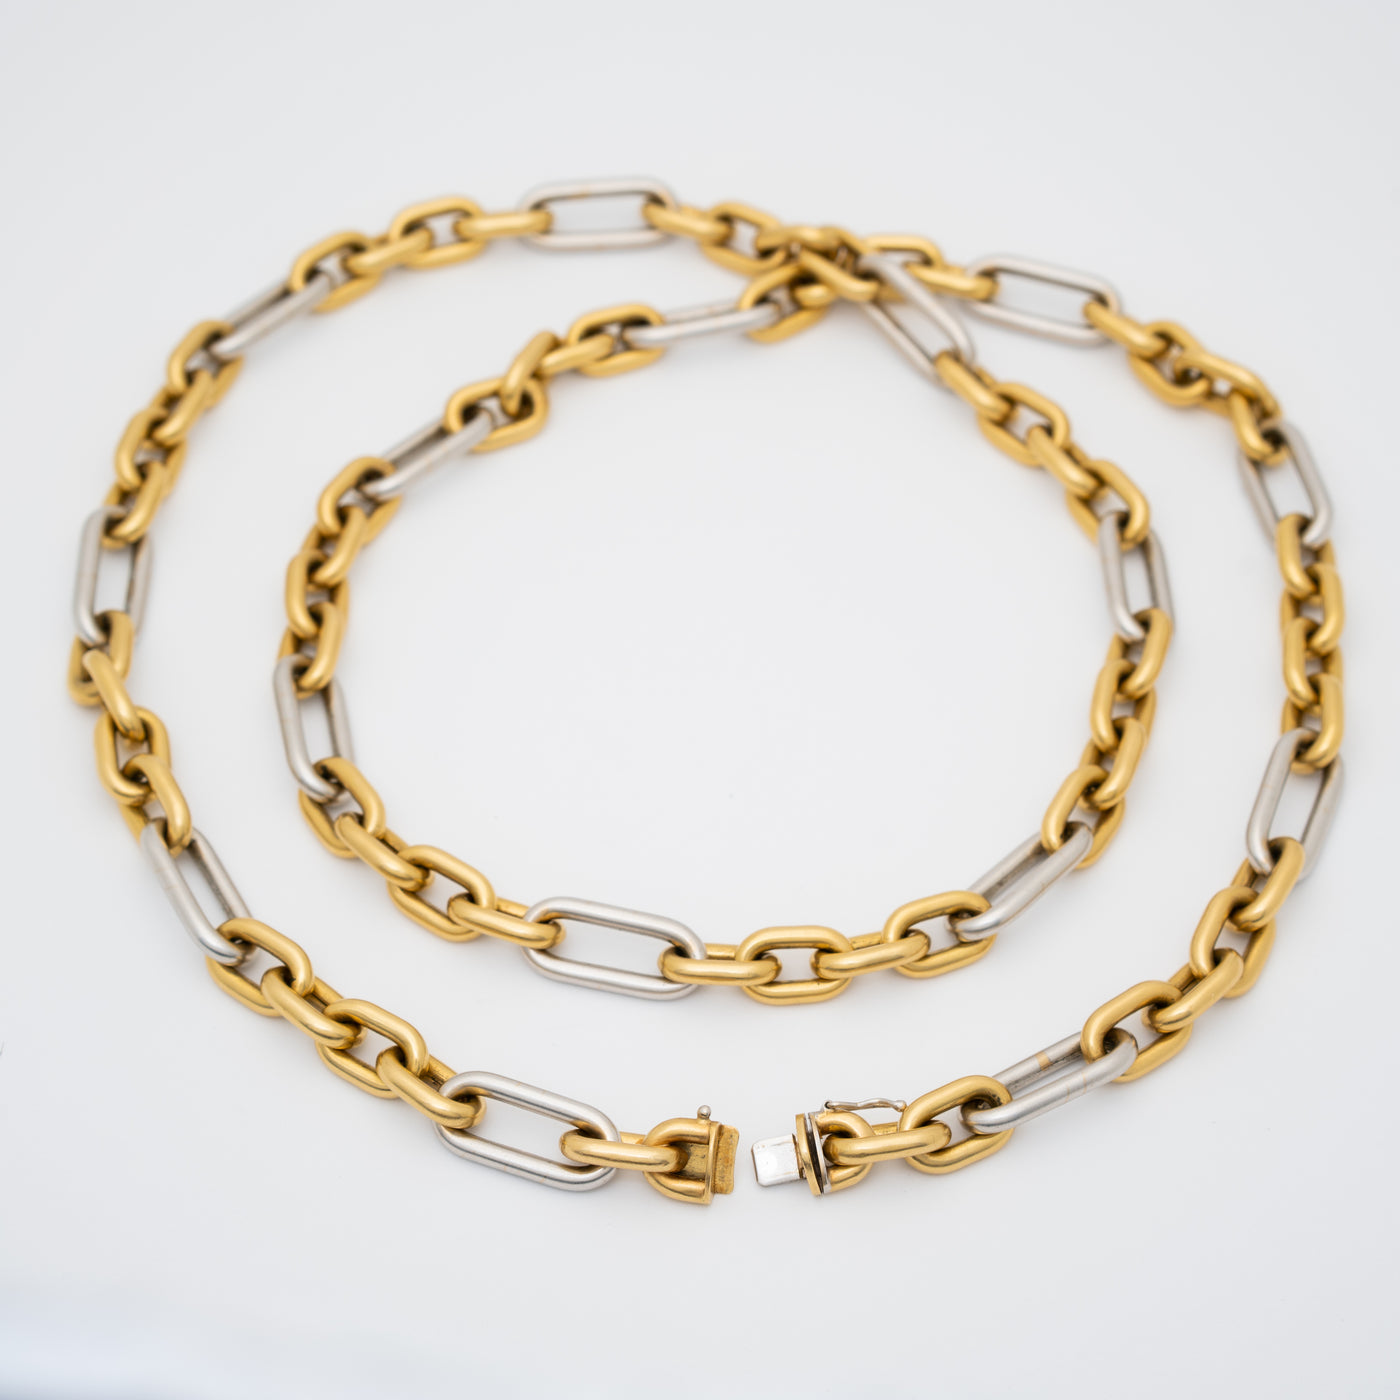 VINTAGE 18K YELLOW AND WHITE GOLD LONG CHAIN c.1980s